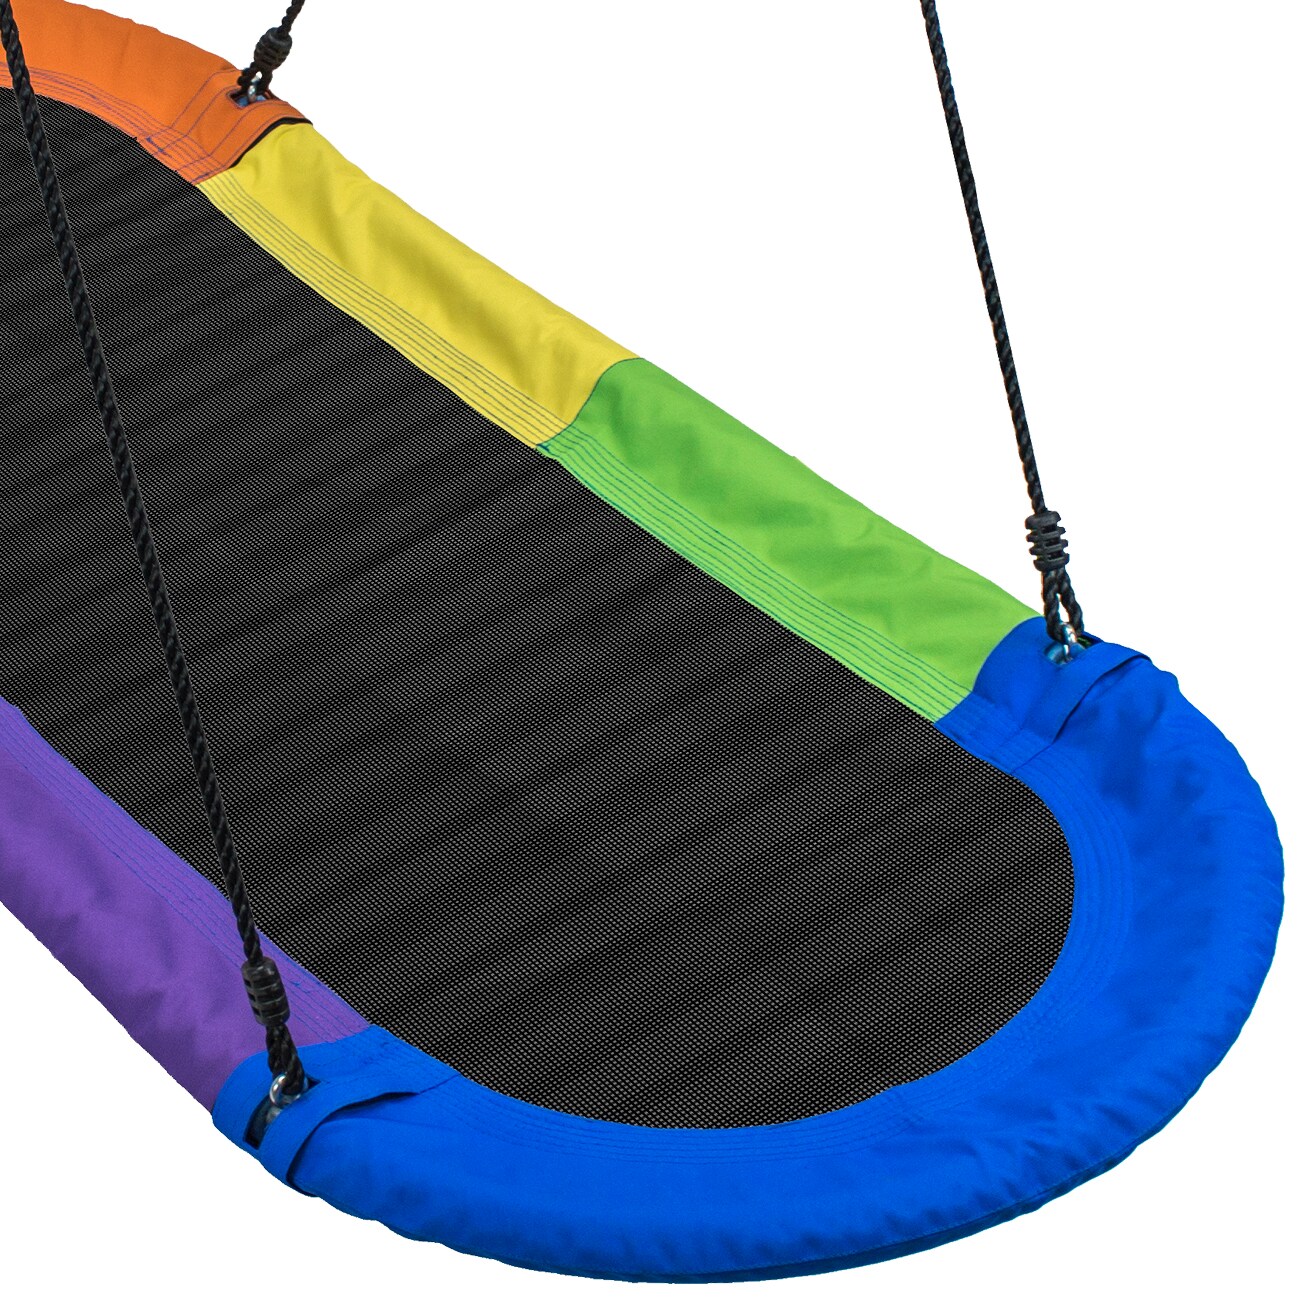 Sorbus Saucer Surf Swing With Flags